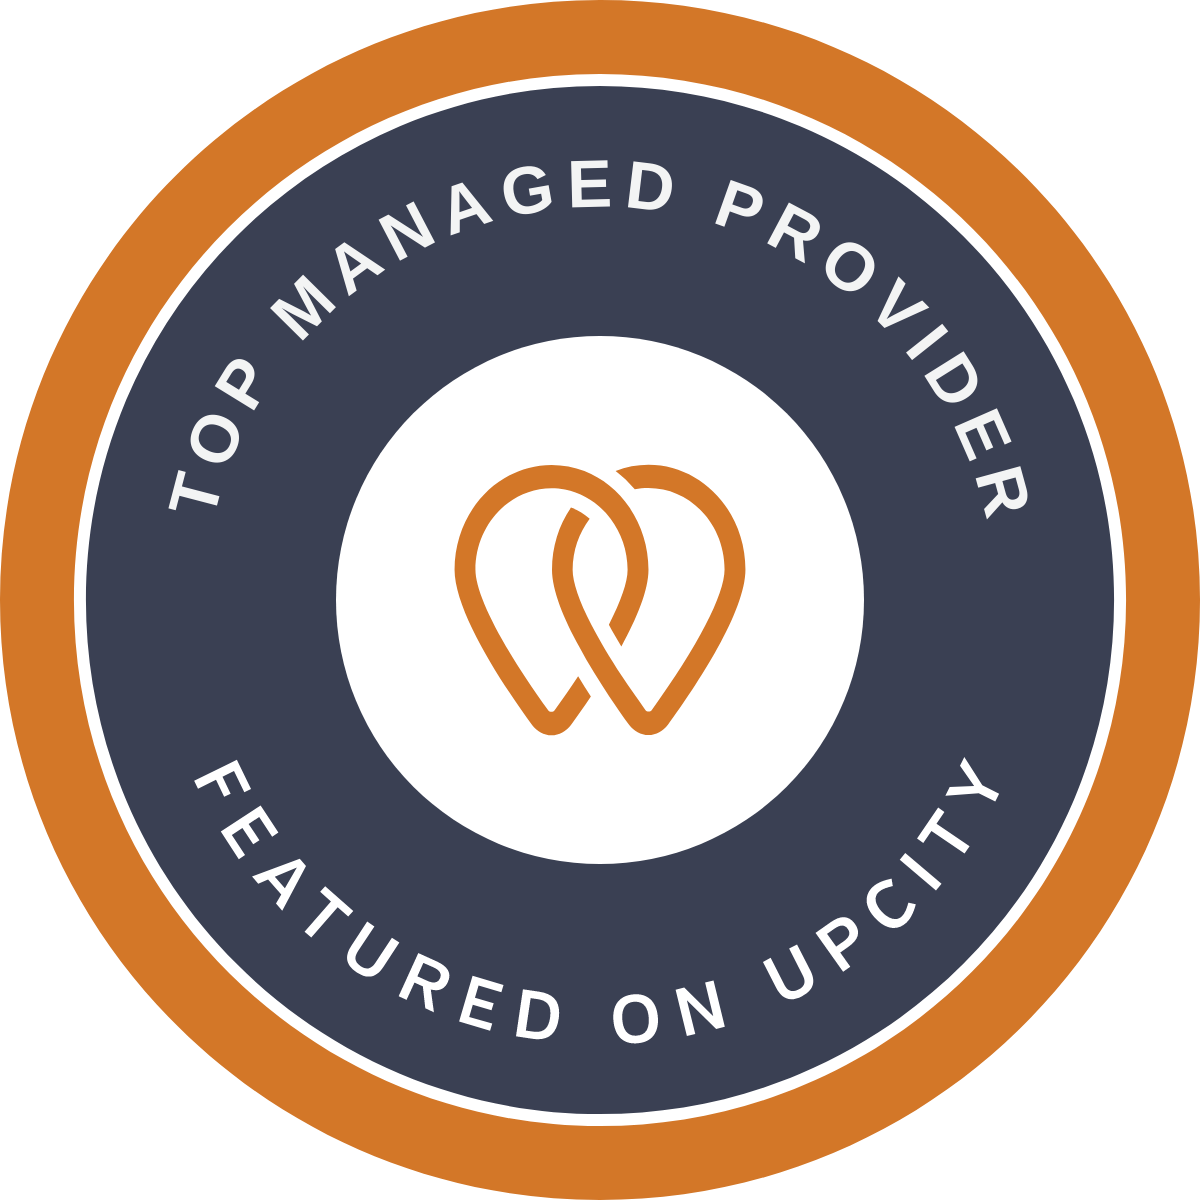 Edafio is an UpCity Top Managed Provider